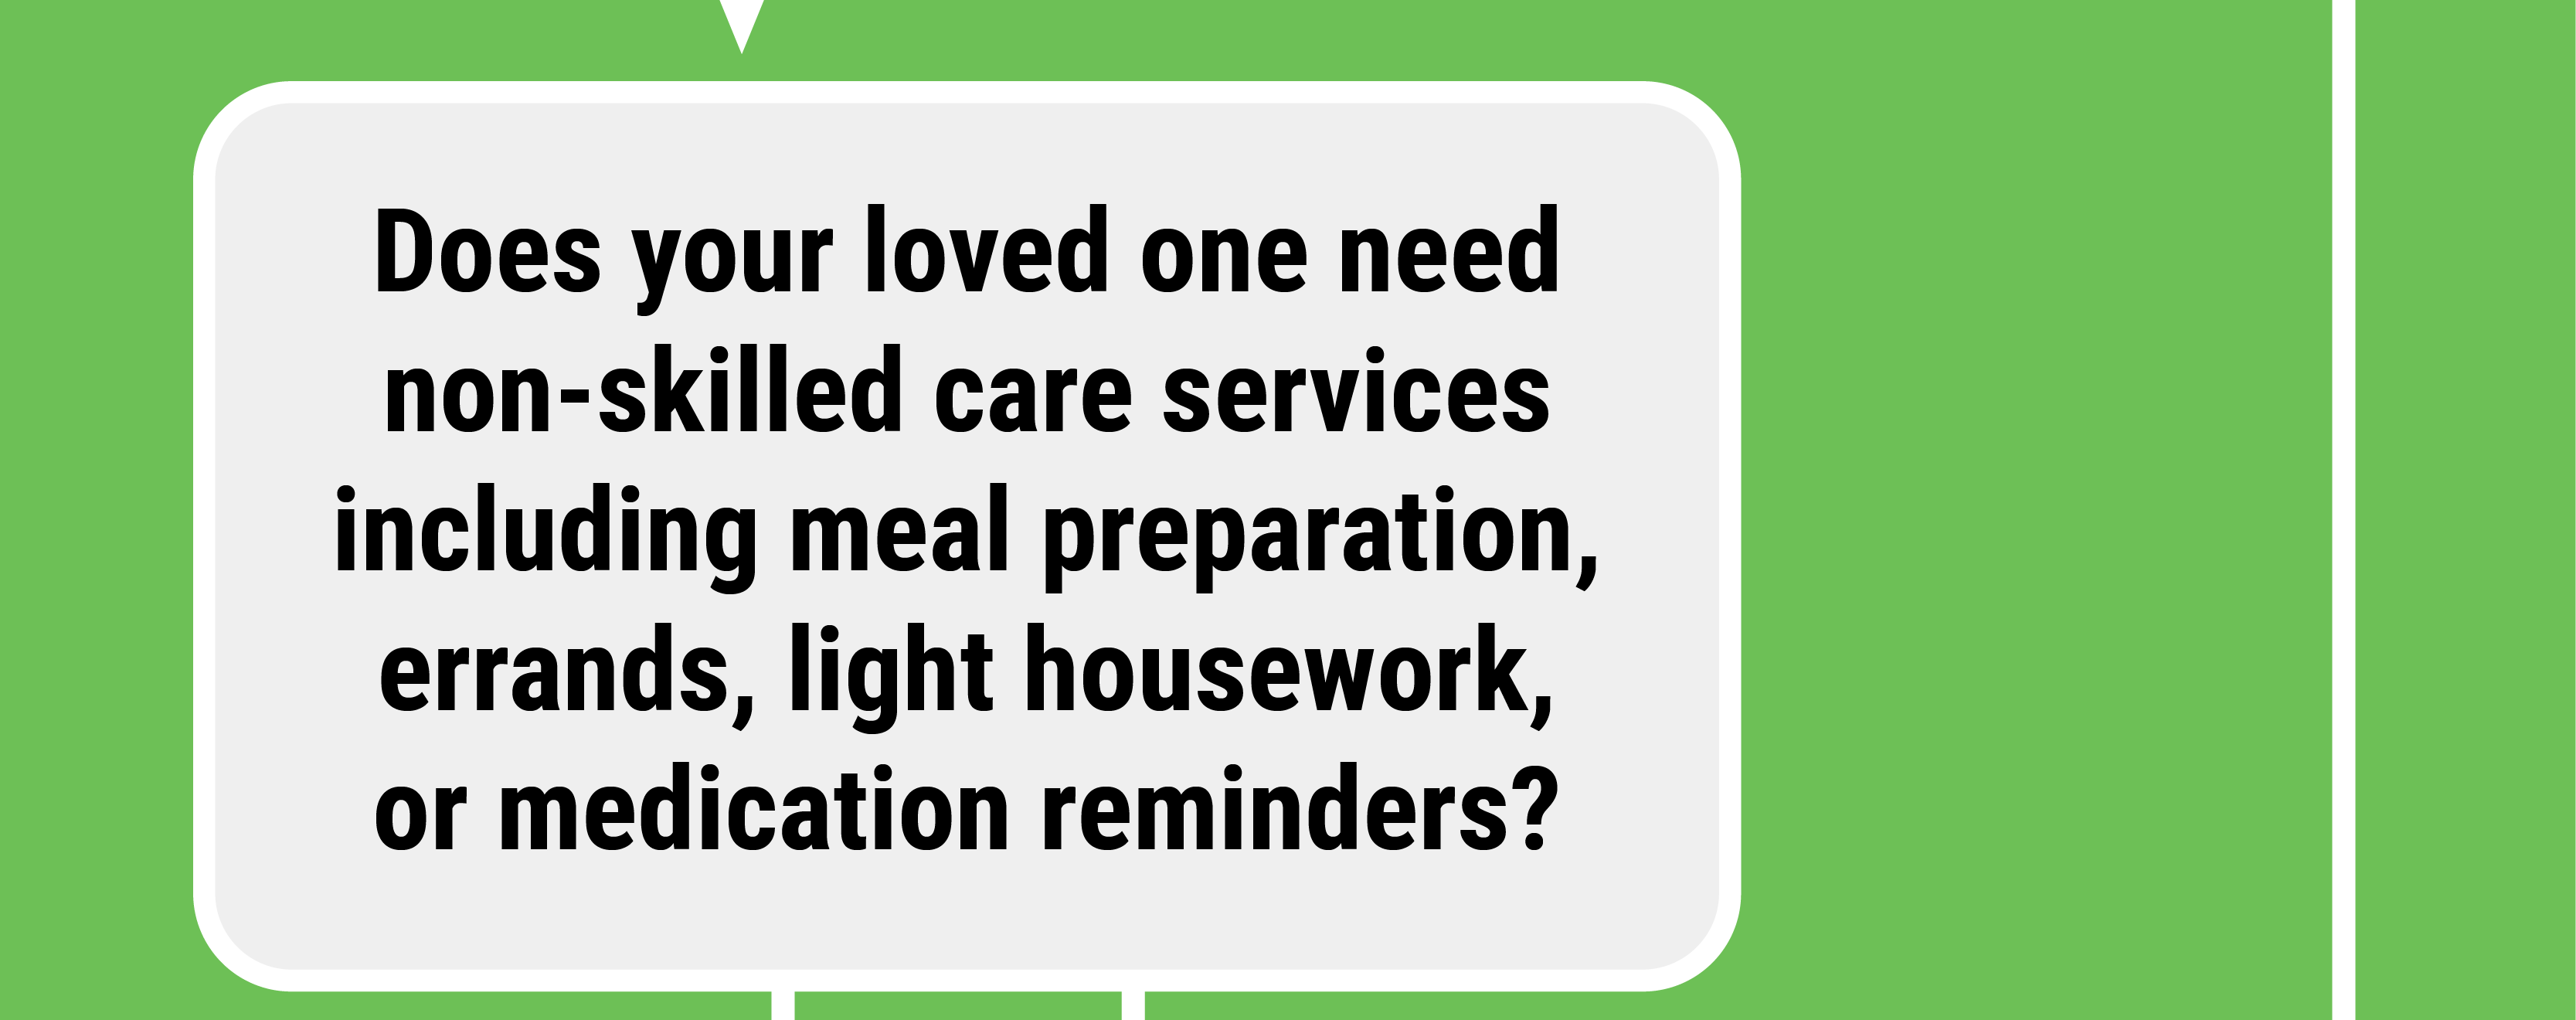 Does your loved one need non-skilled care services including meal preparation, errands, light housework, or medication reminders?